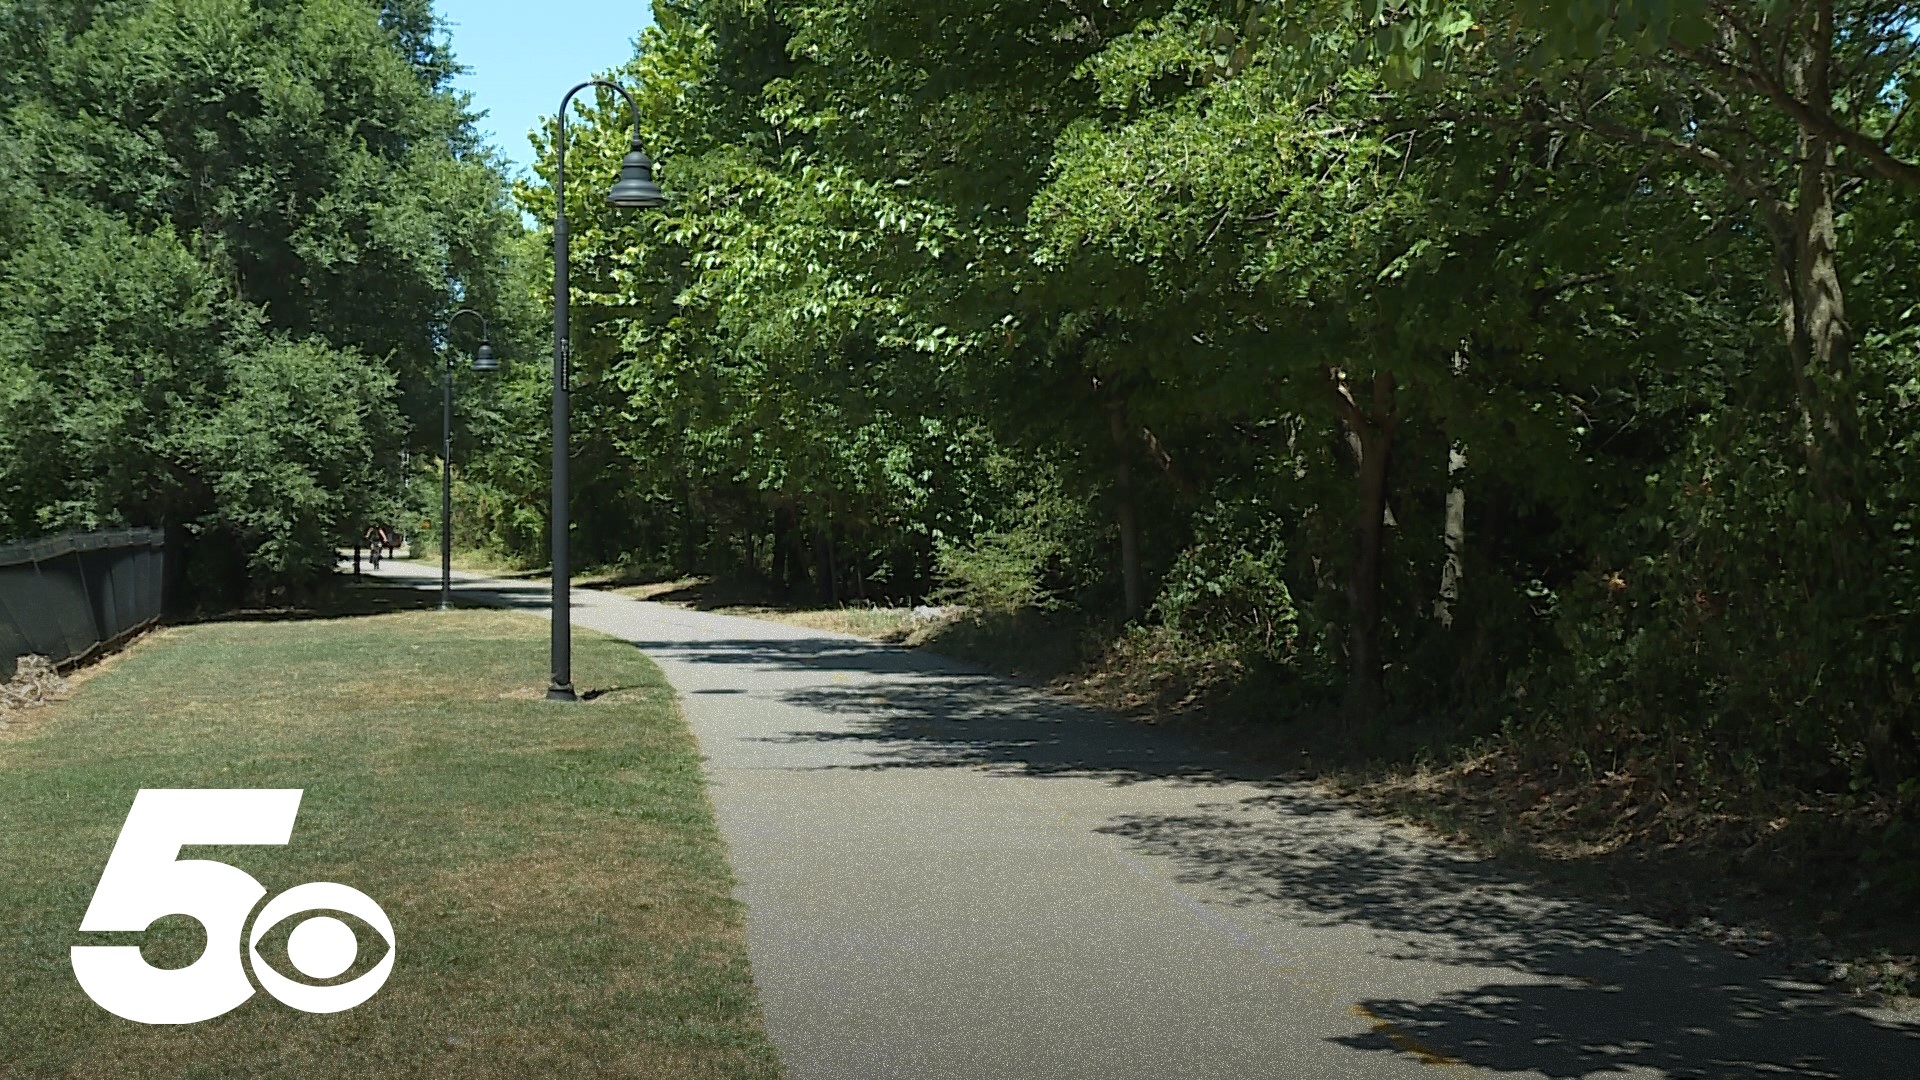 As Northwest Arkansas continues to grow, the regional planning commission is working to make the area more walkable and bike-friendly.